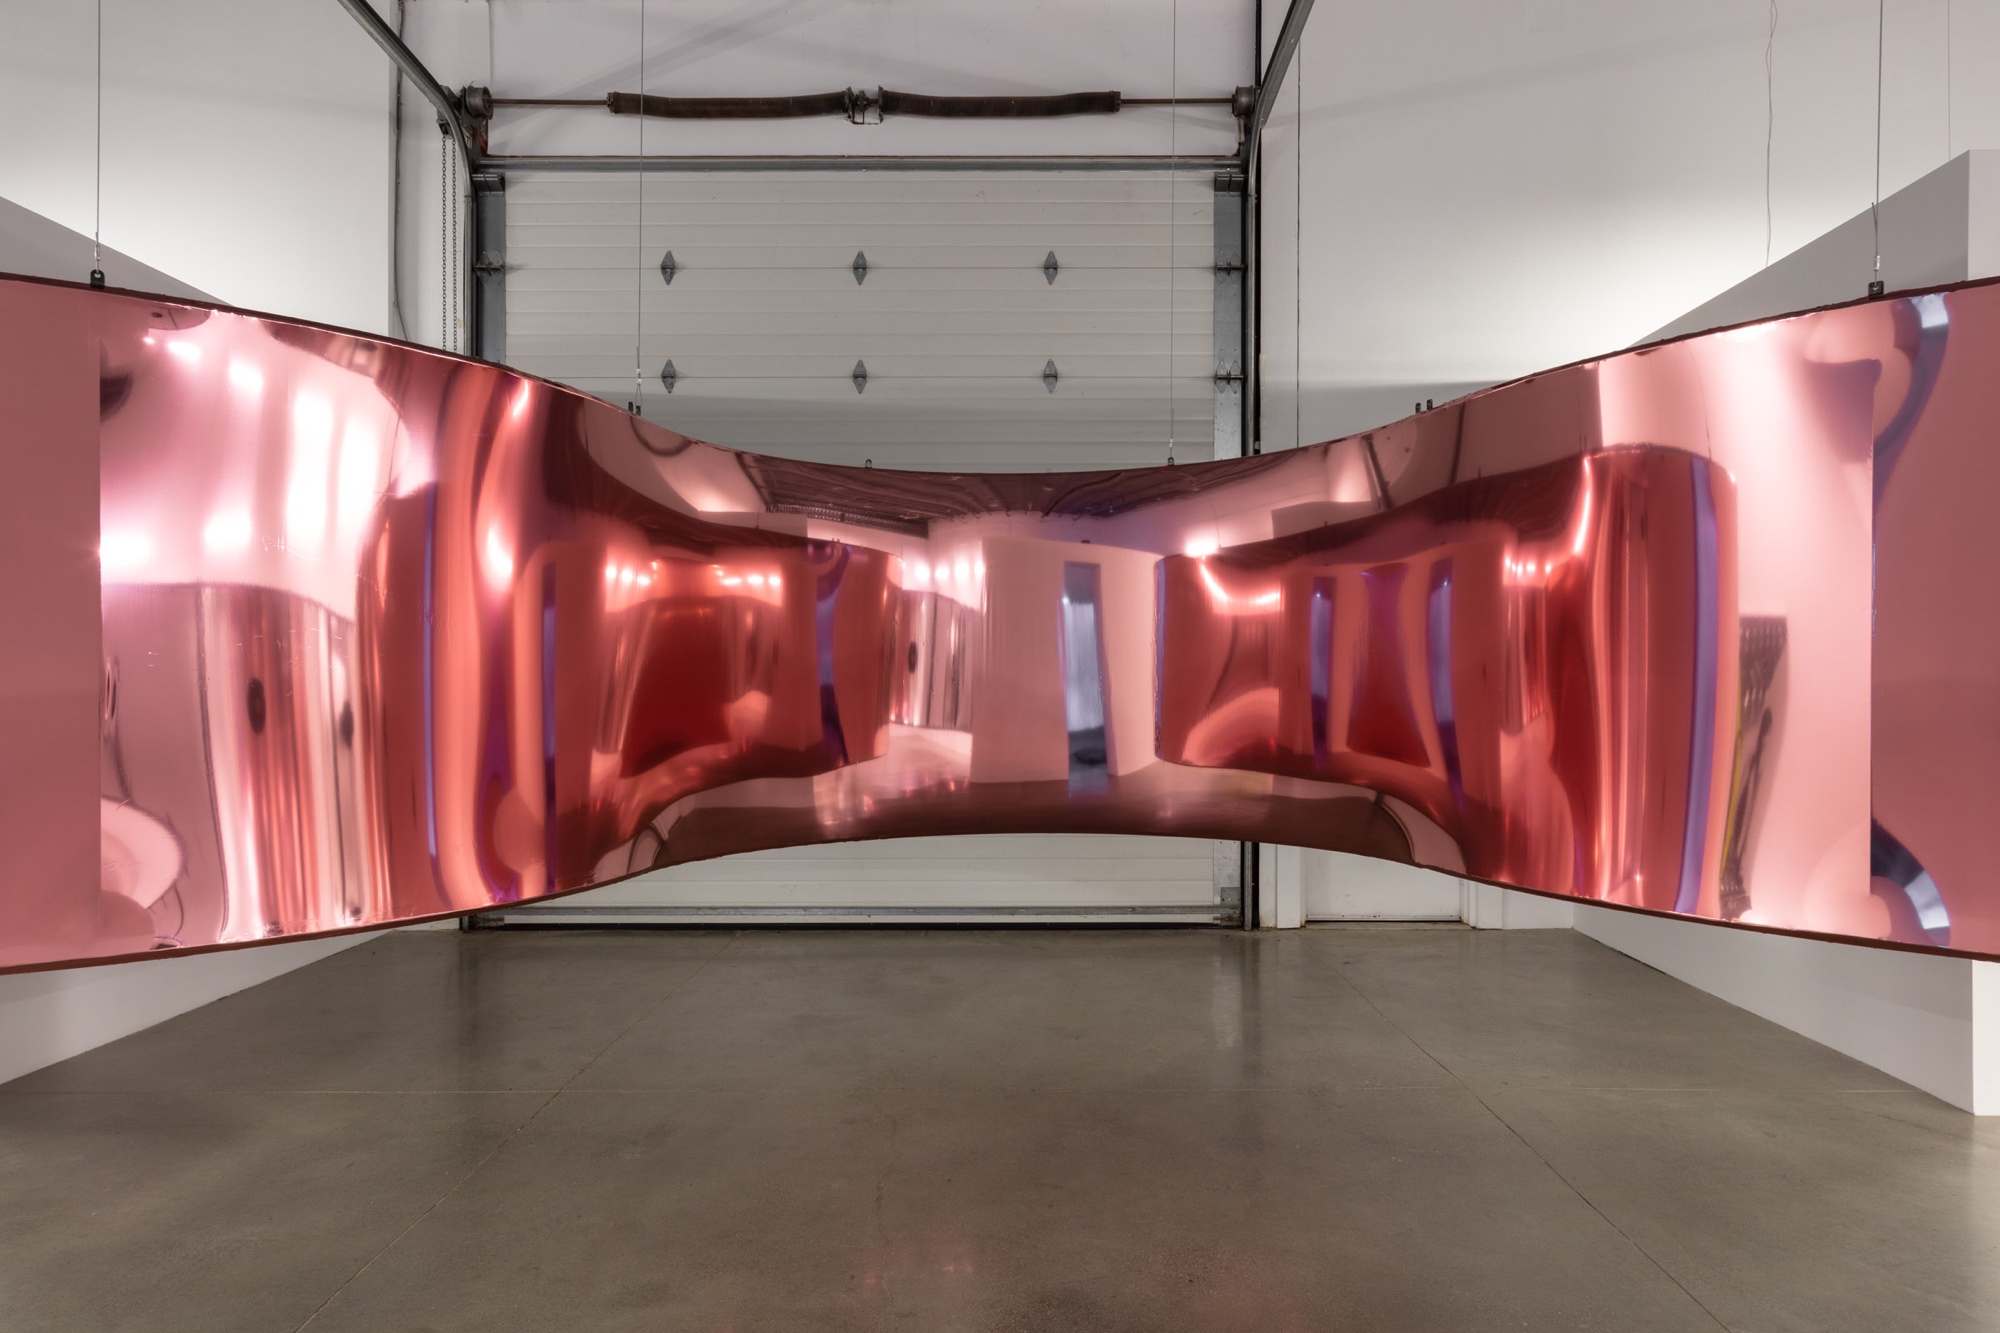 A massive, labyrinthine sound sculpture with a pulsating surface that distorts reflections.